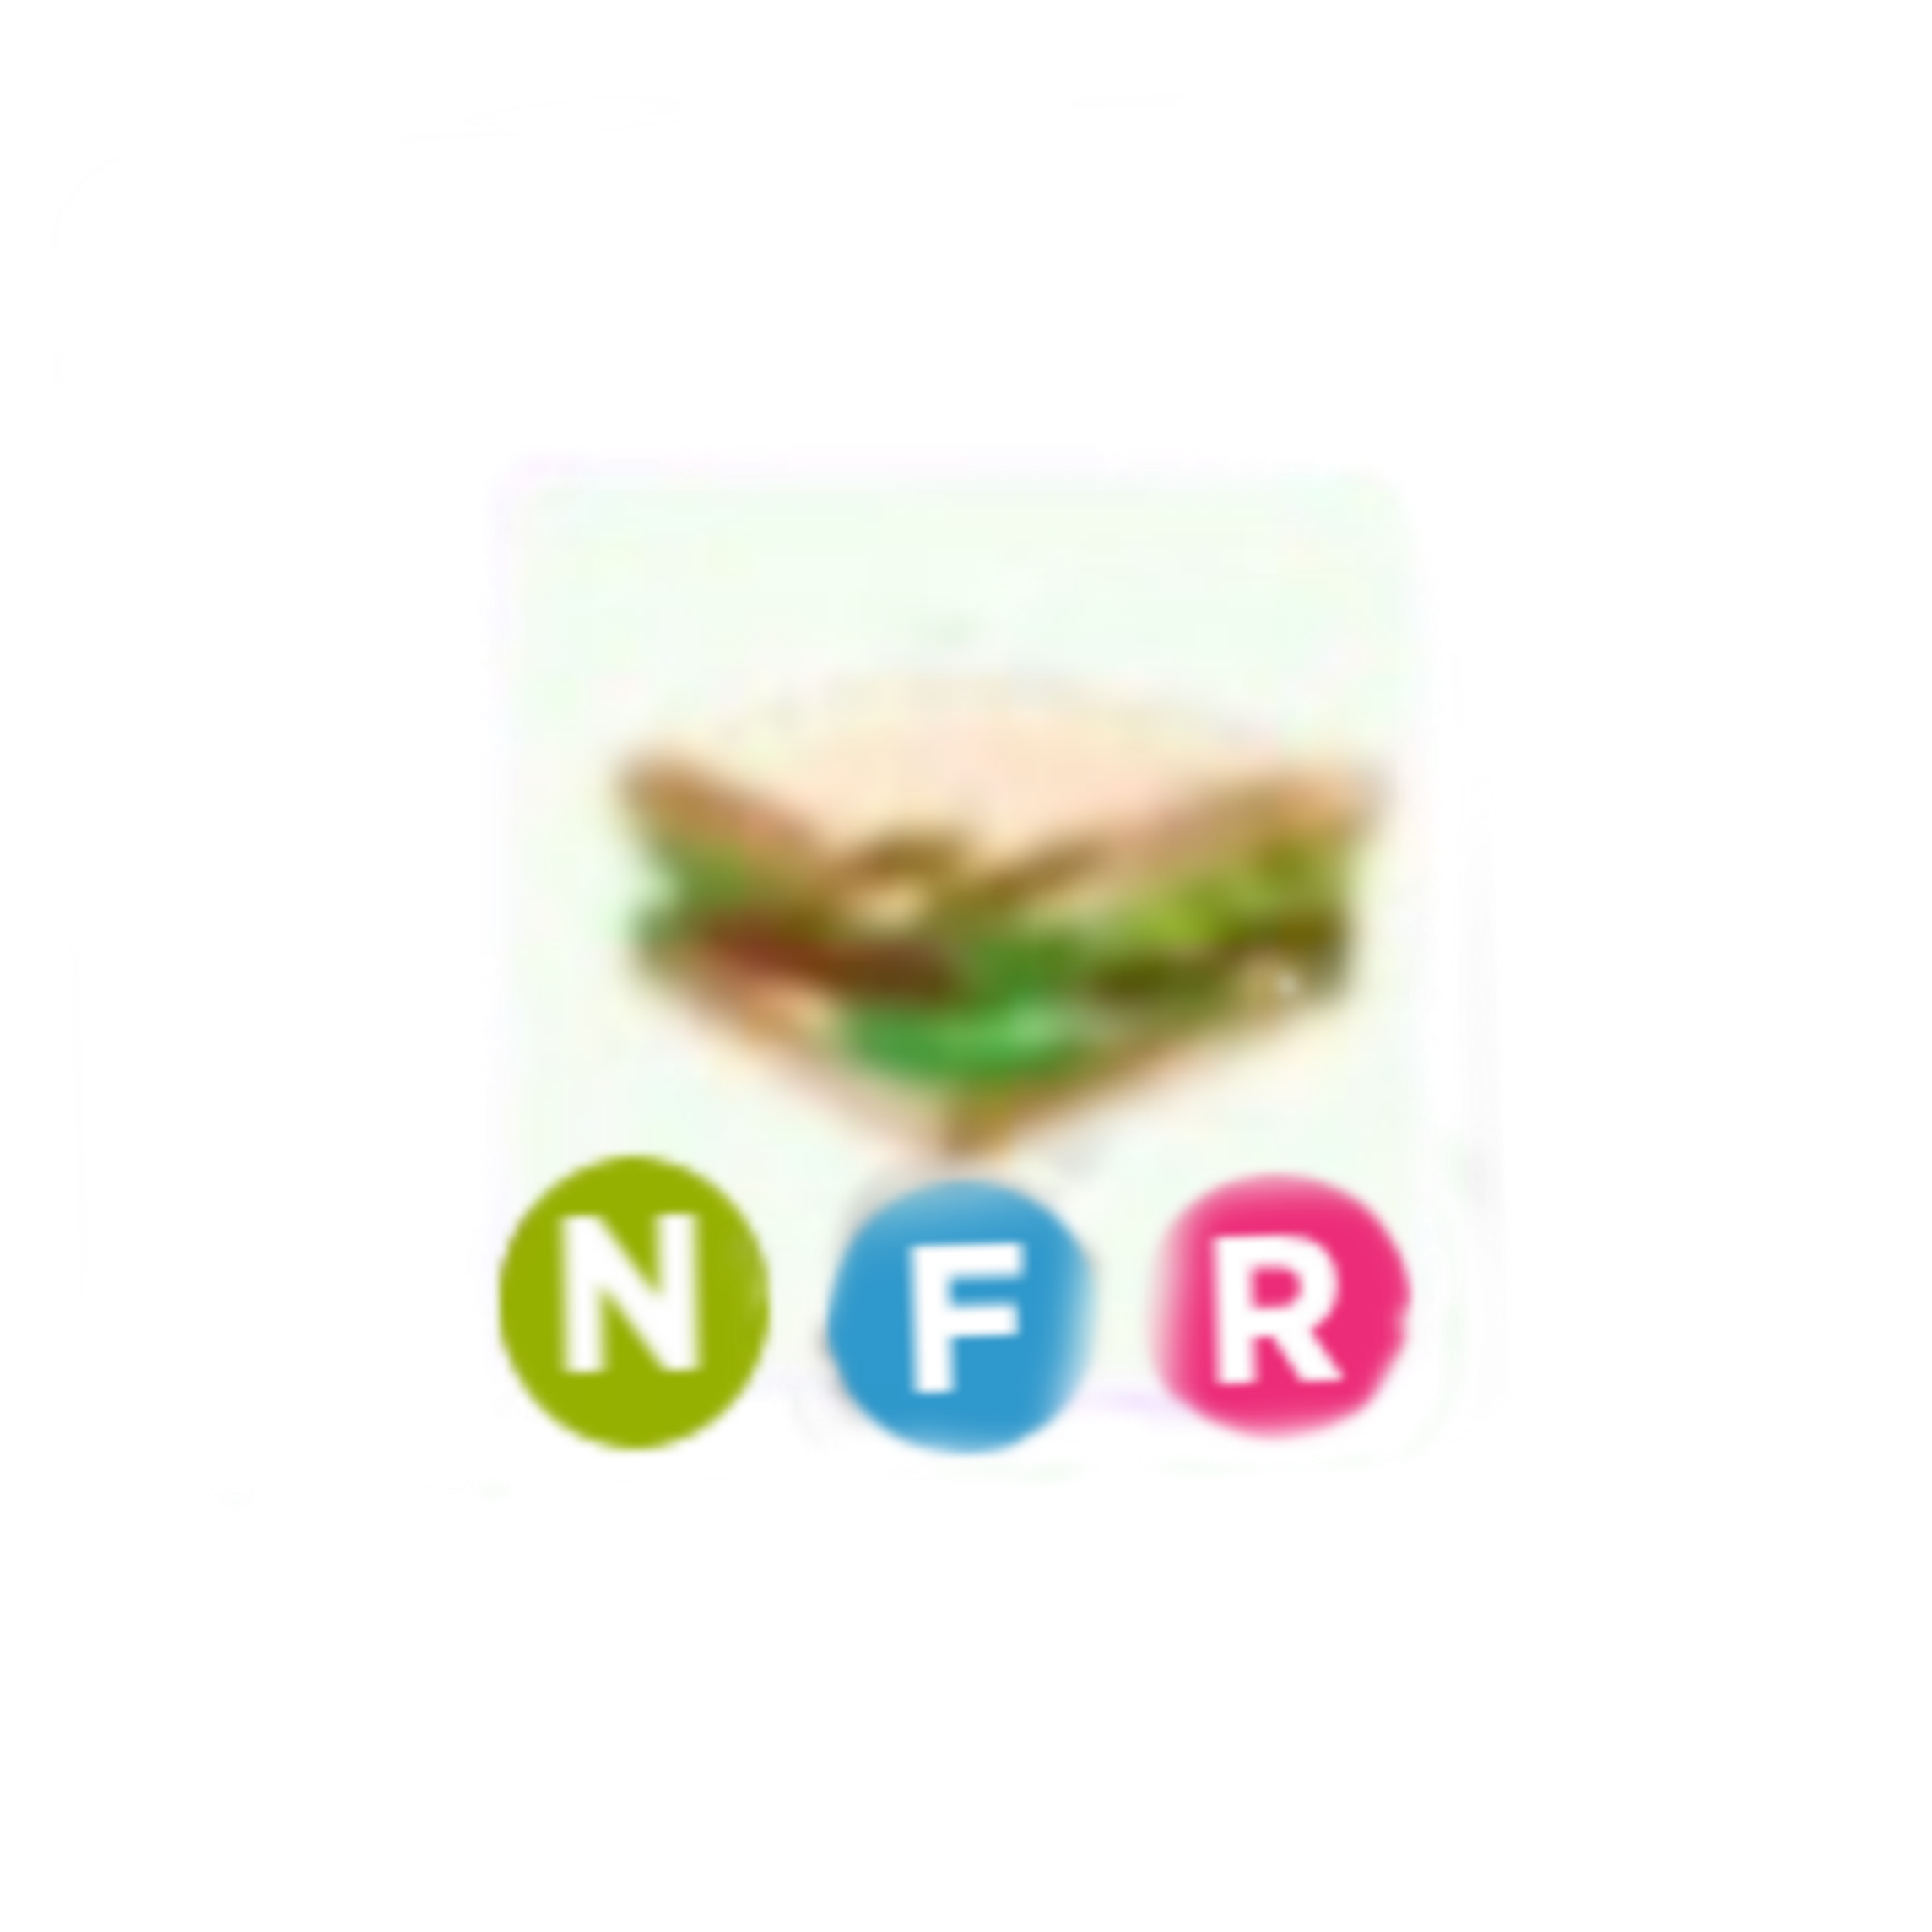 freetoedit nfr nfr sticker by spartitaisa